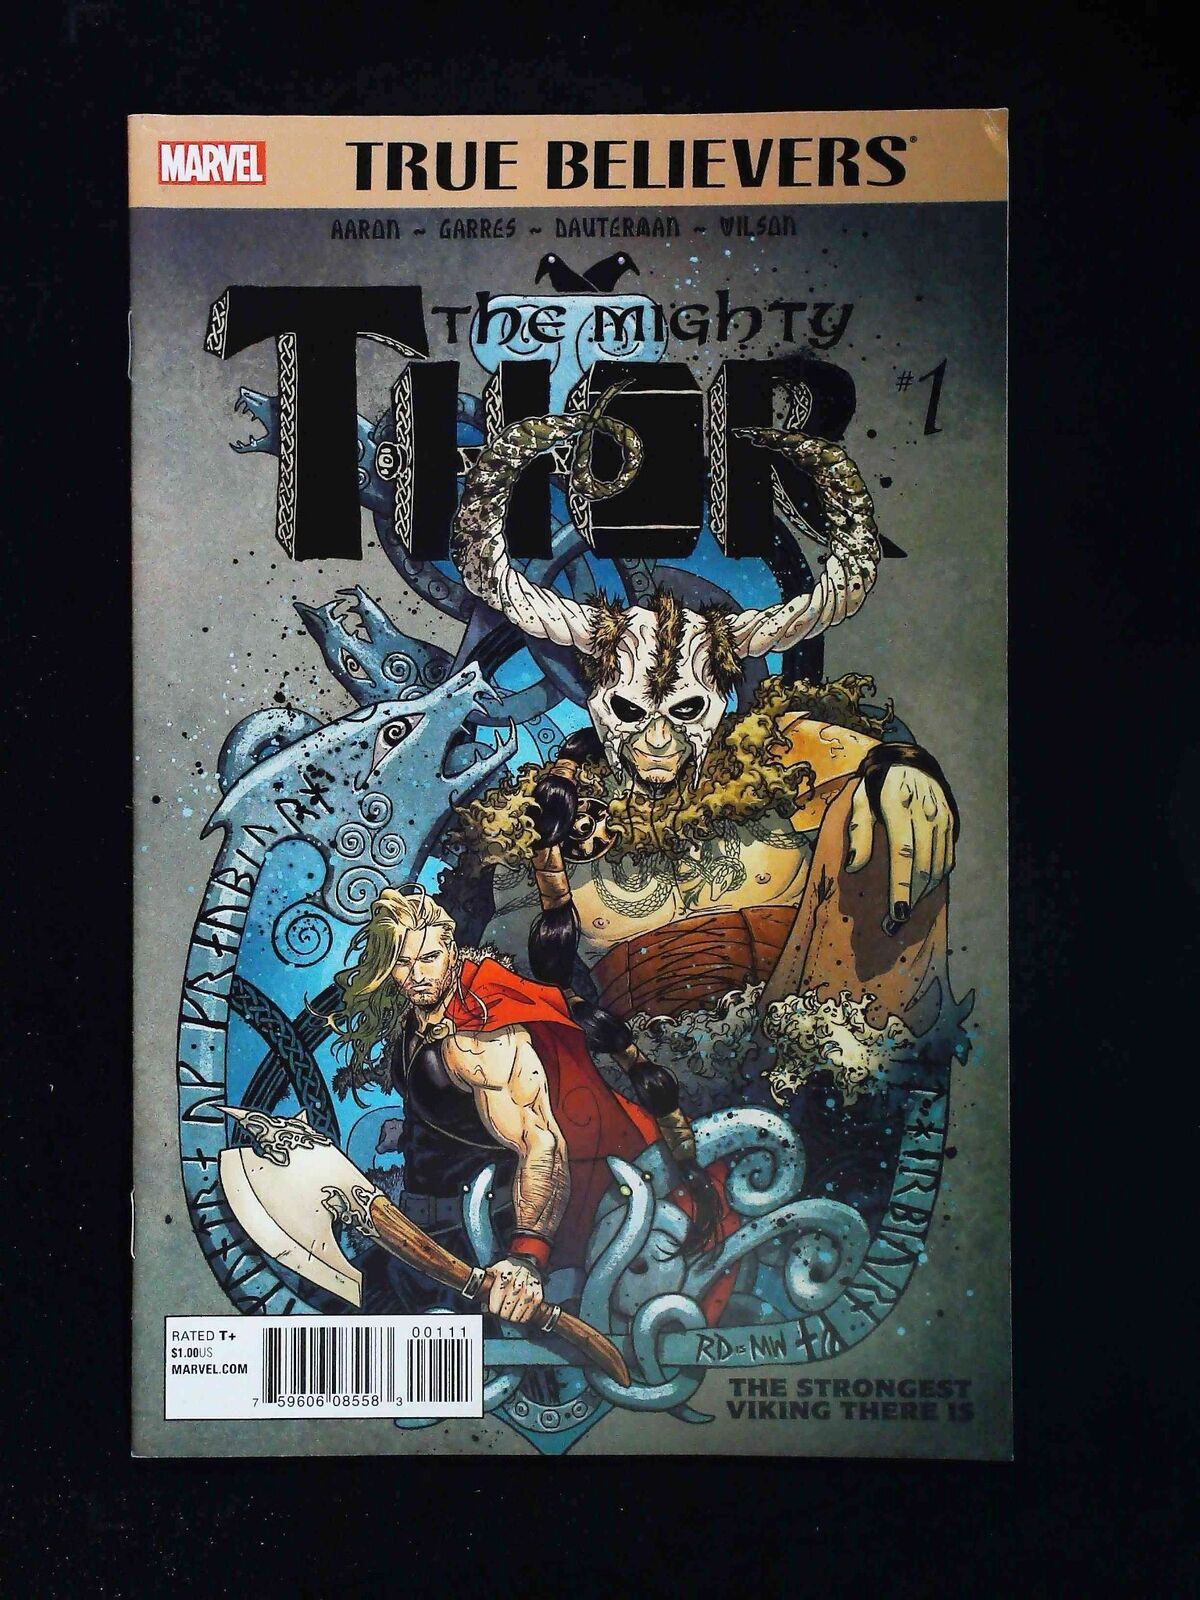 True Believers Mighty Thor Strongest Viking There Is #1  Marvel Comics 2016 Vf+